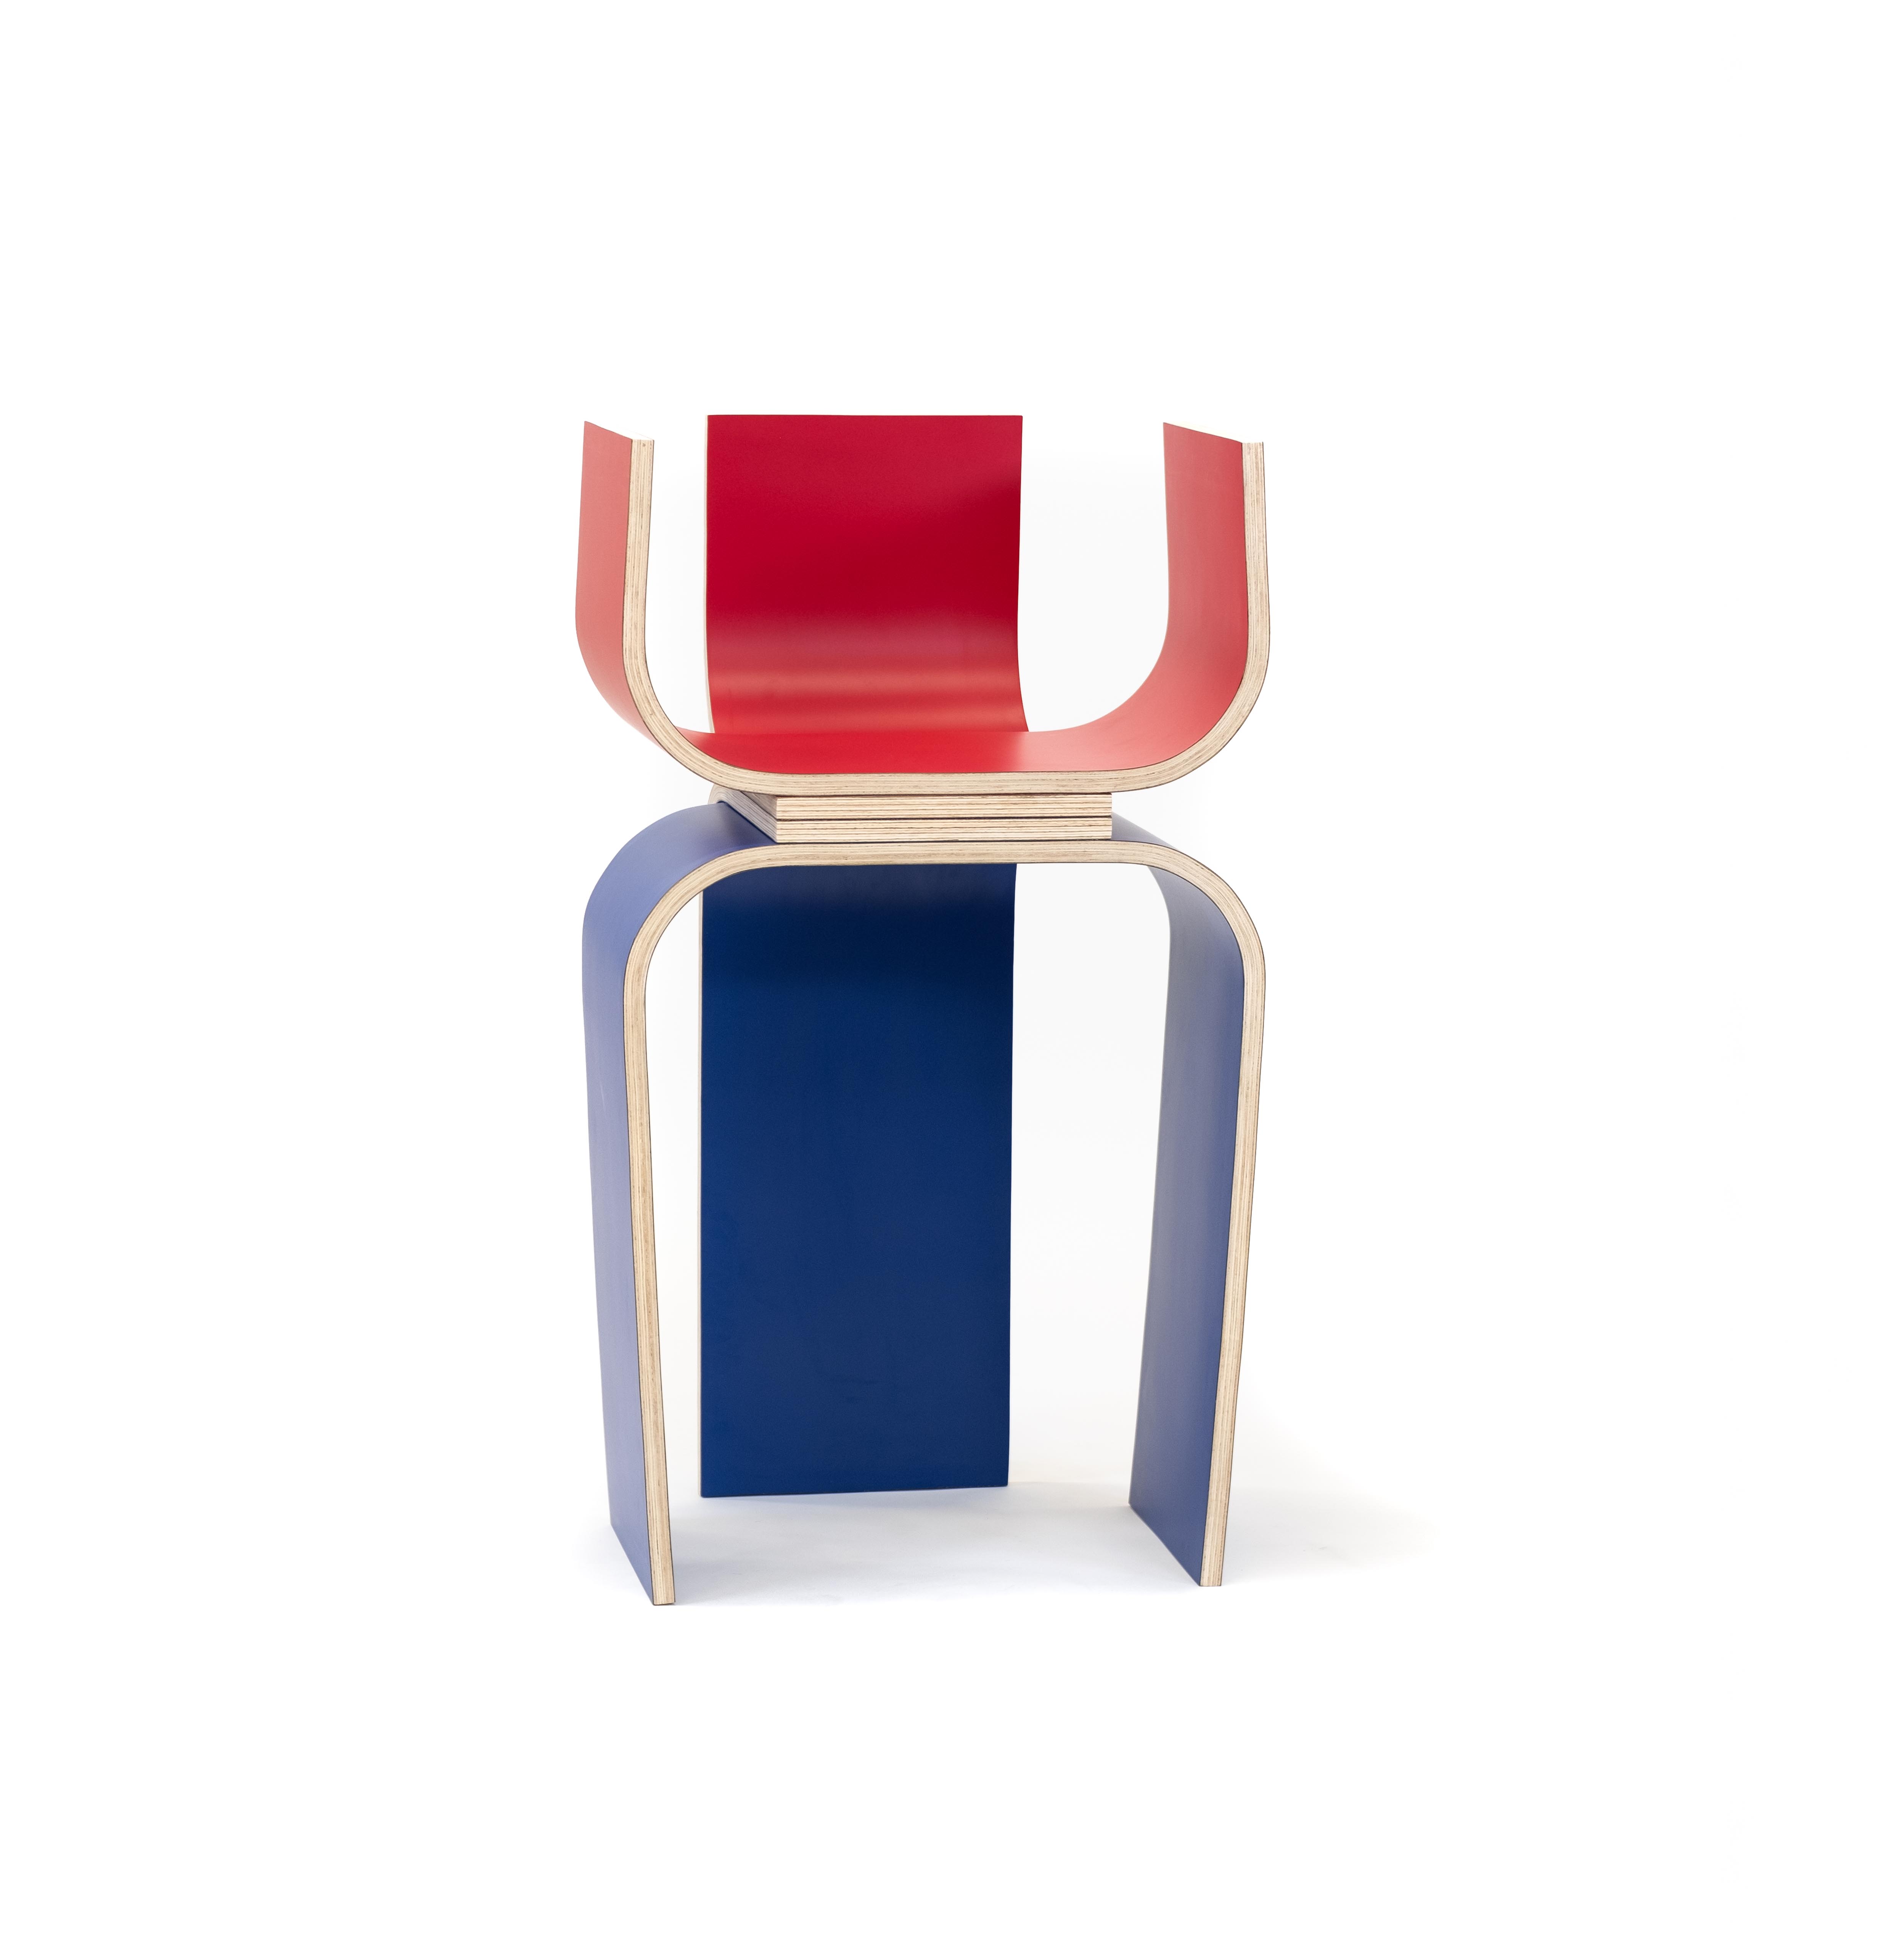 A funky chair made form colourful bent plywood. Red upper surface and blue lower surfaces.